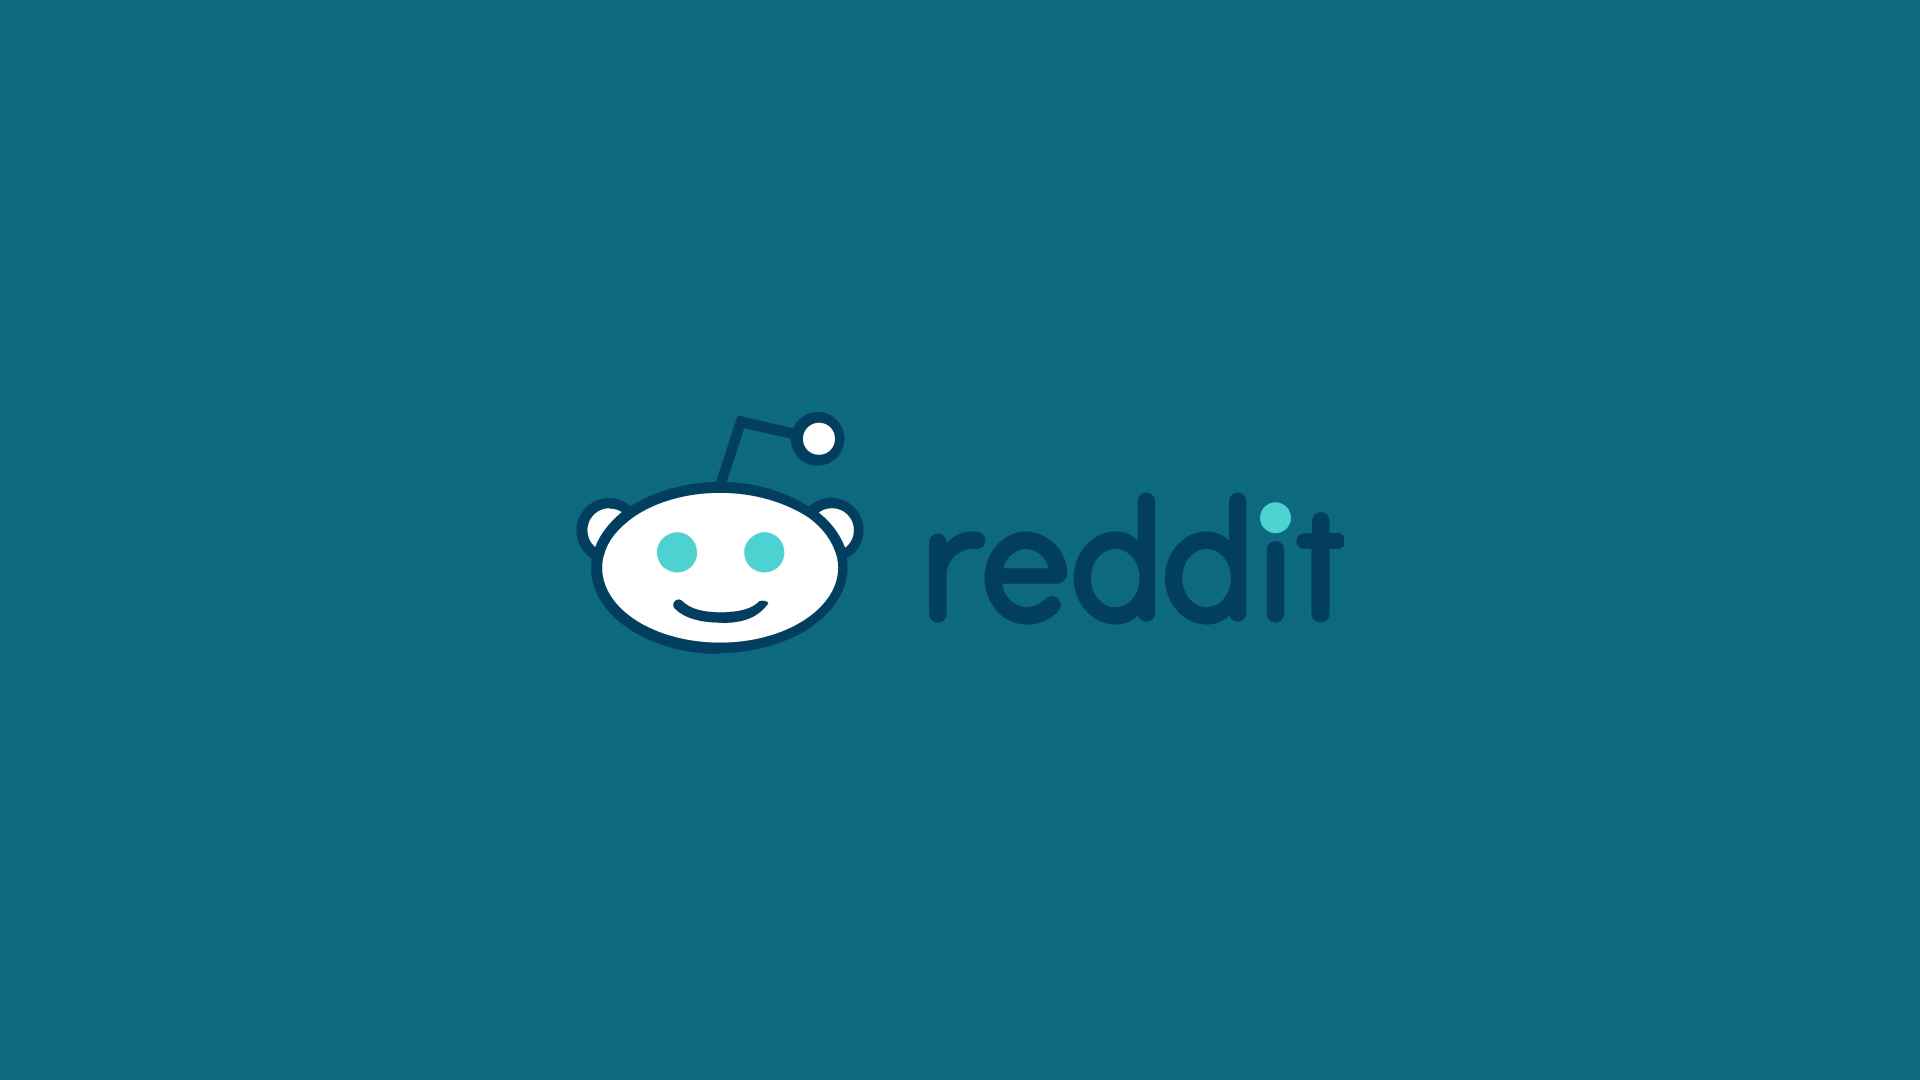 Is it possible to monetize your presence or content on Reddit?